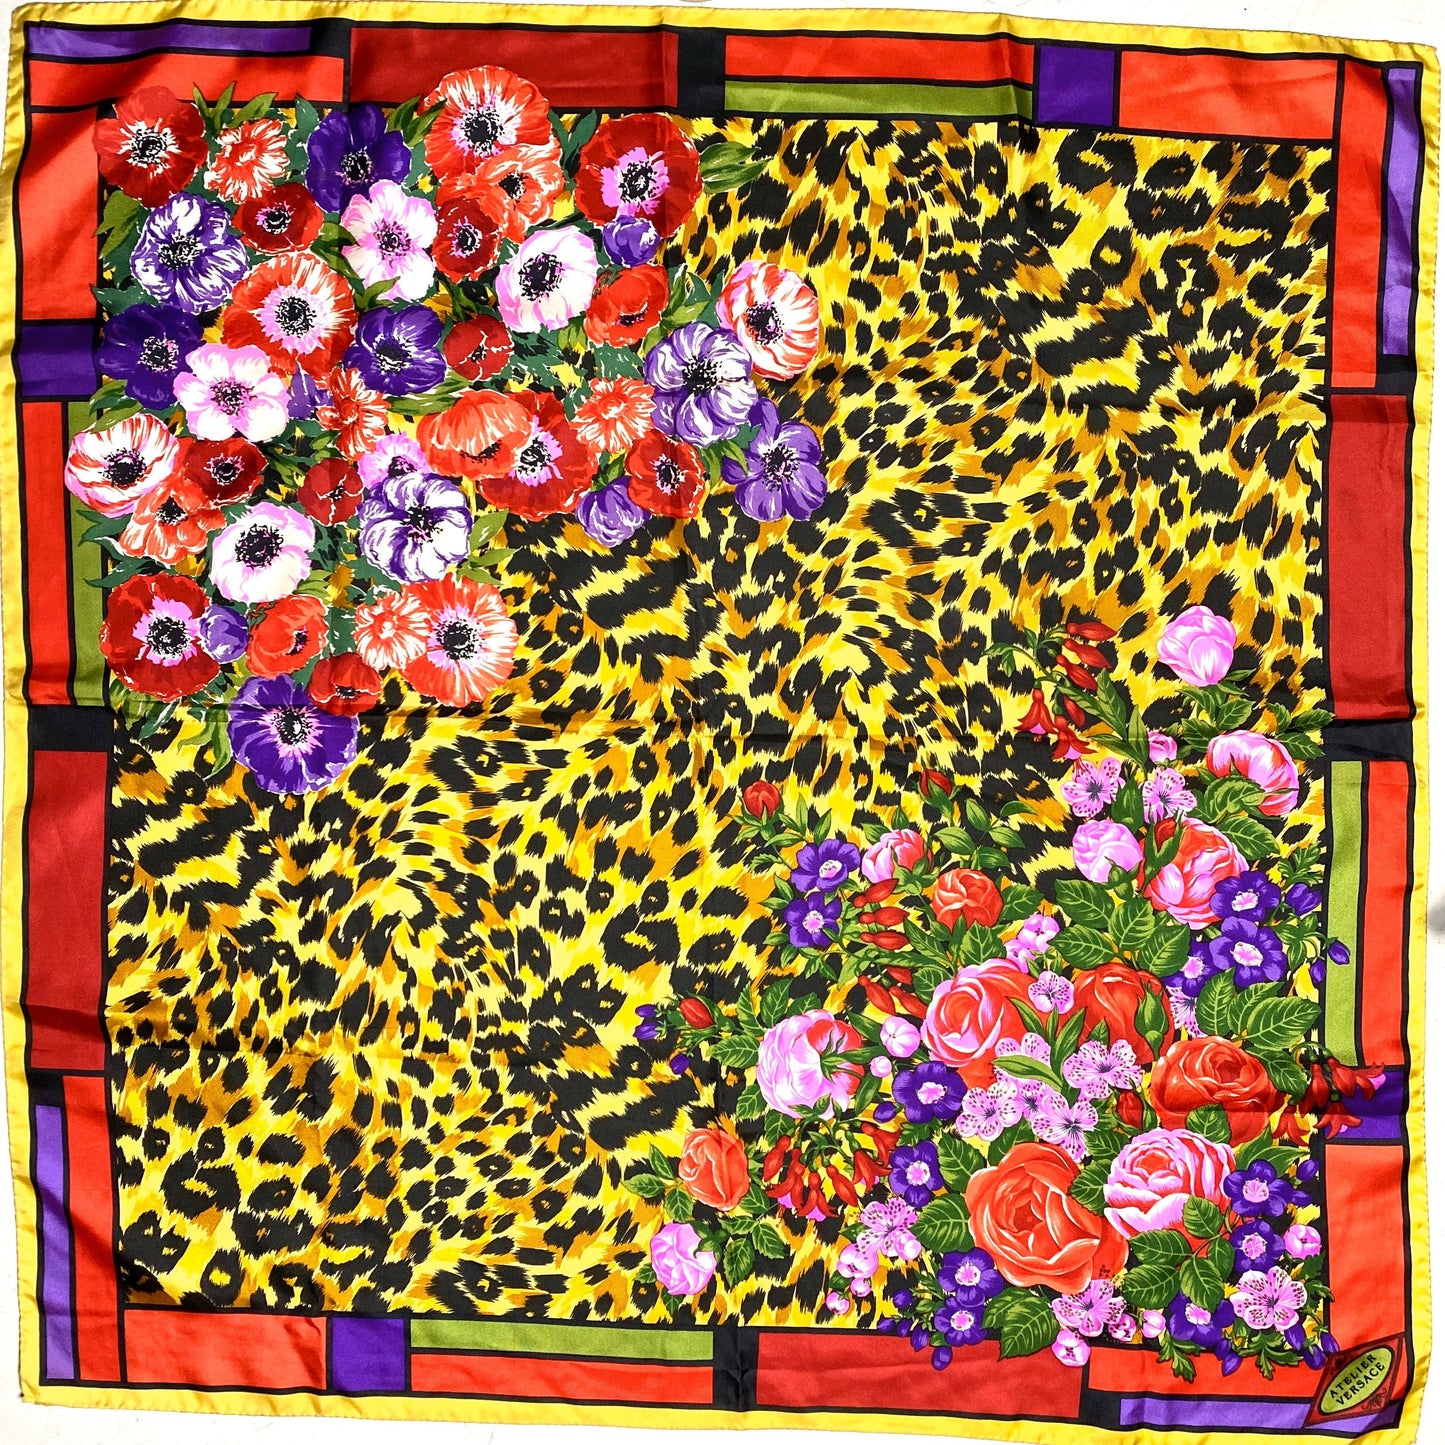 Atelier Versace vintage 90s baroque floral/cheetah pure silk scarf, as new.